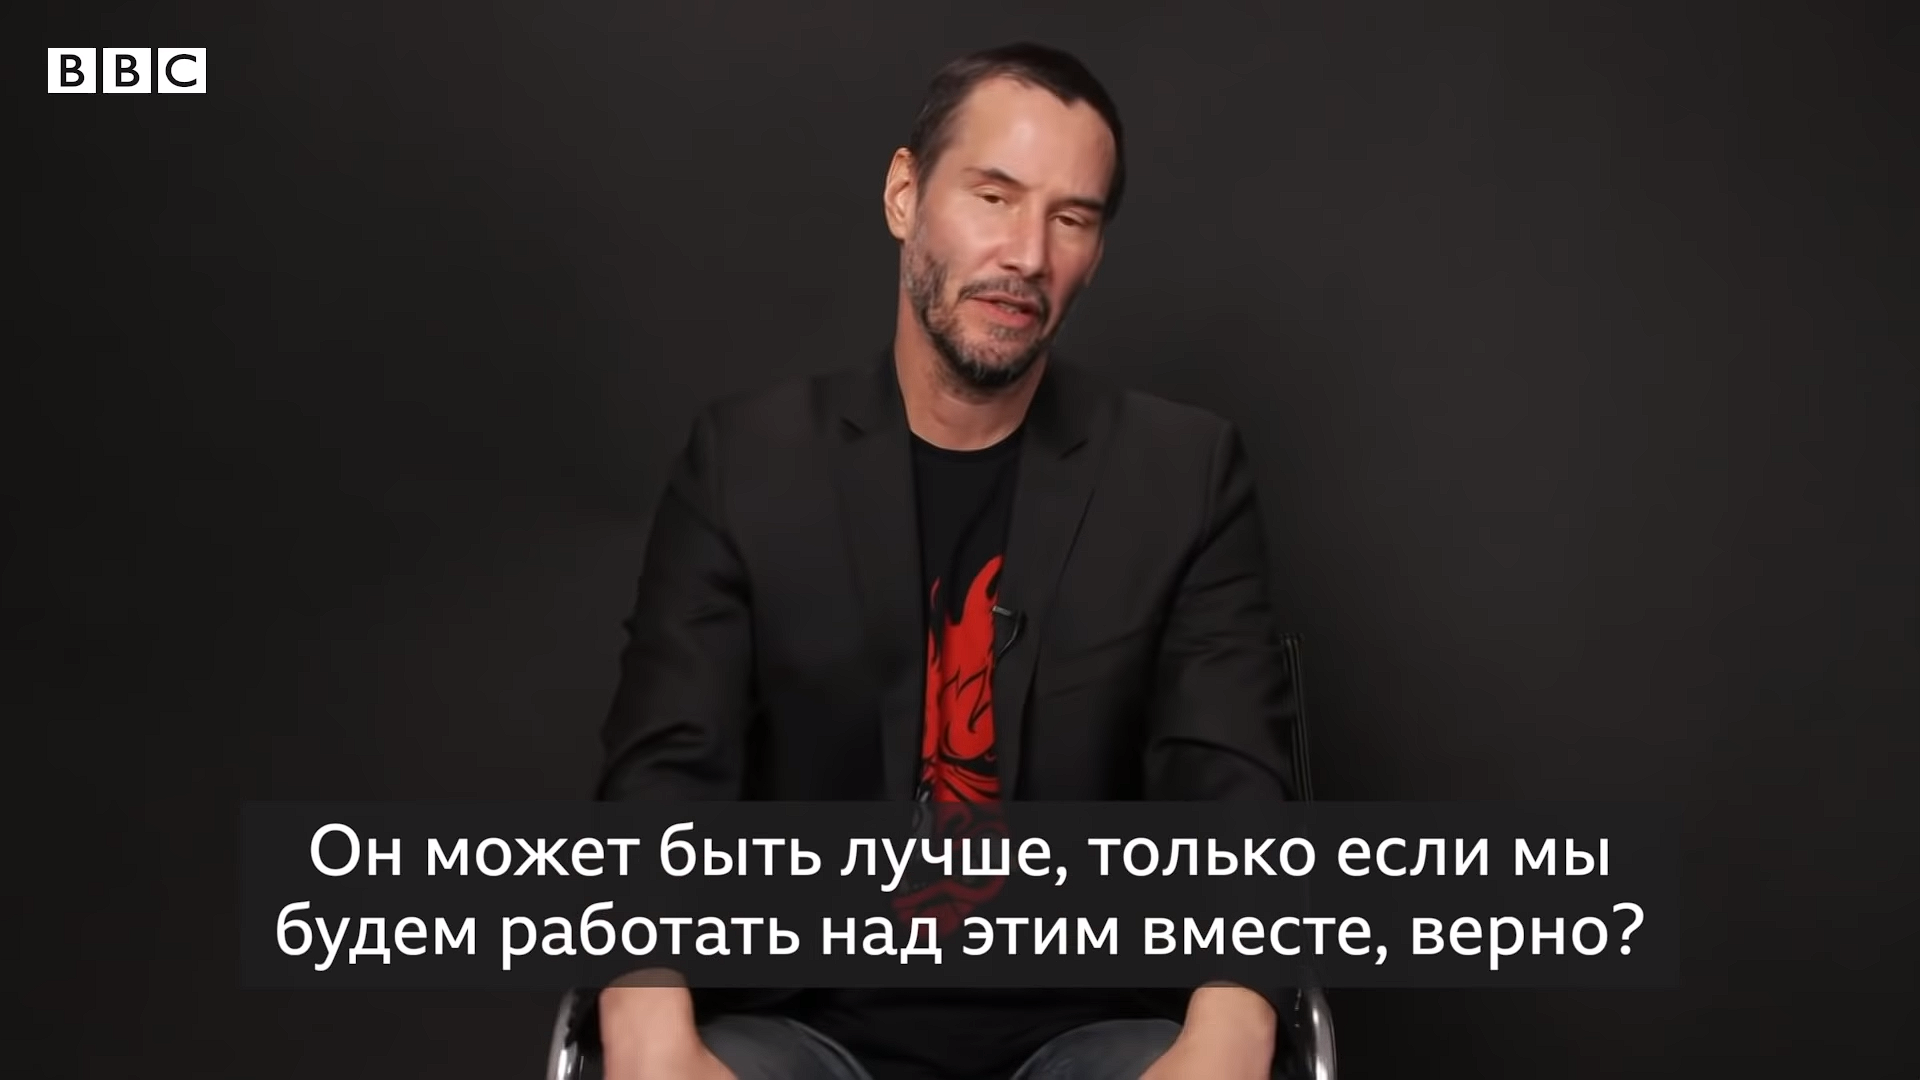 The kindest answer - Keanu Reeves, news, Positive, BBC, 2021, Storyboard, Actors and actresses